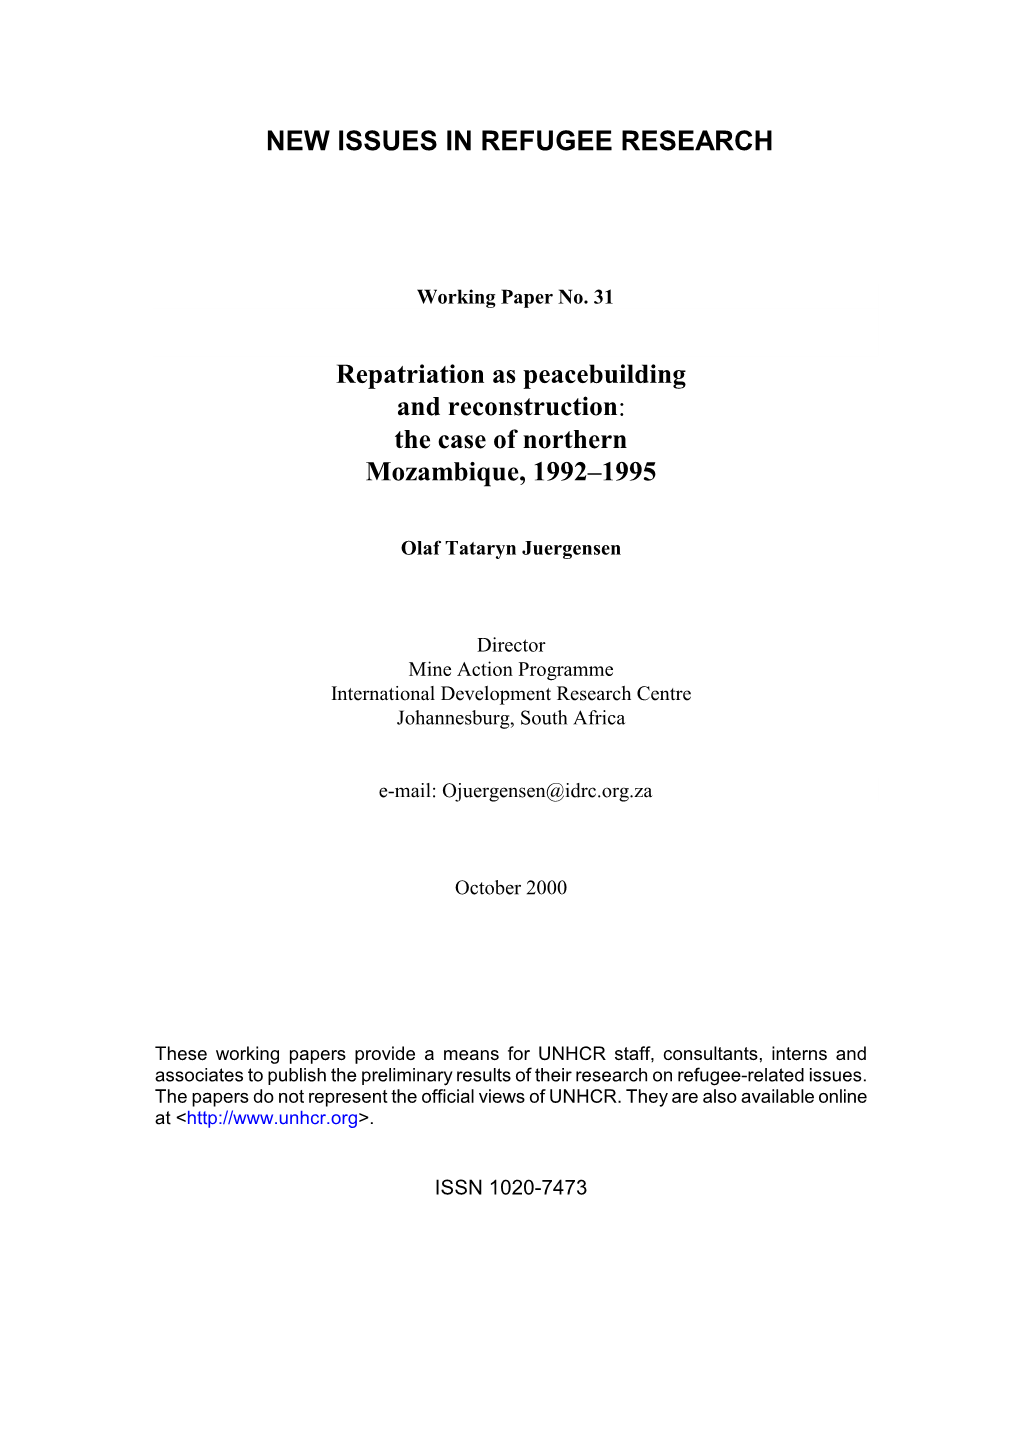 Repatriation As Peacebuilding and Reconstruction: the Case of Northern Mozambique, 1992–1995